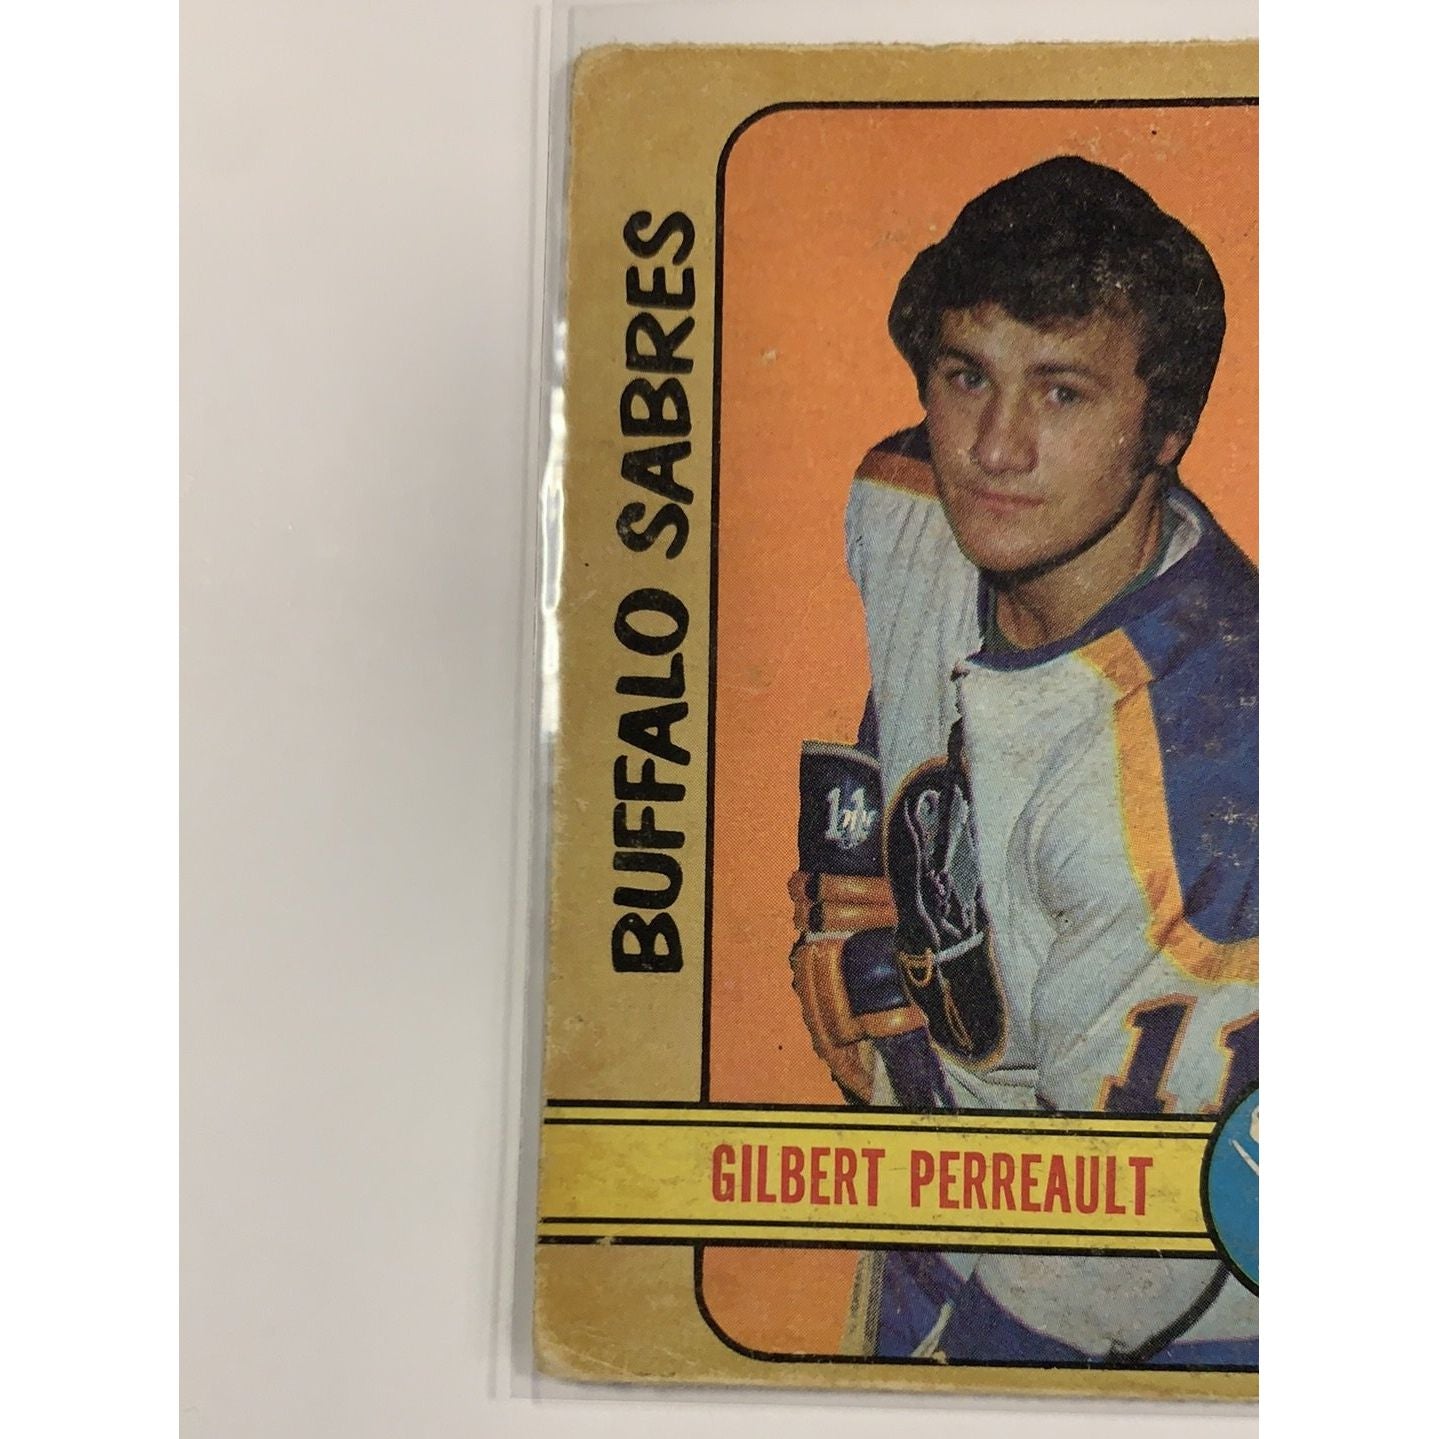  1972-73 O-Pee-Chee Gilbert Perreault 3rd Year Card  Local Legends Cards & Collectibles